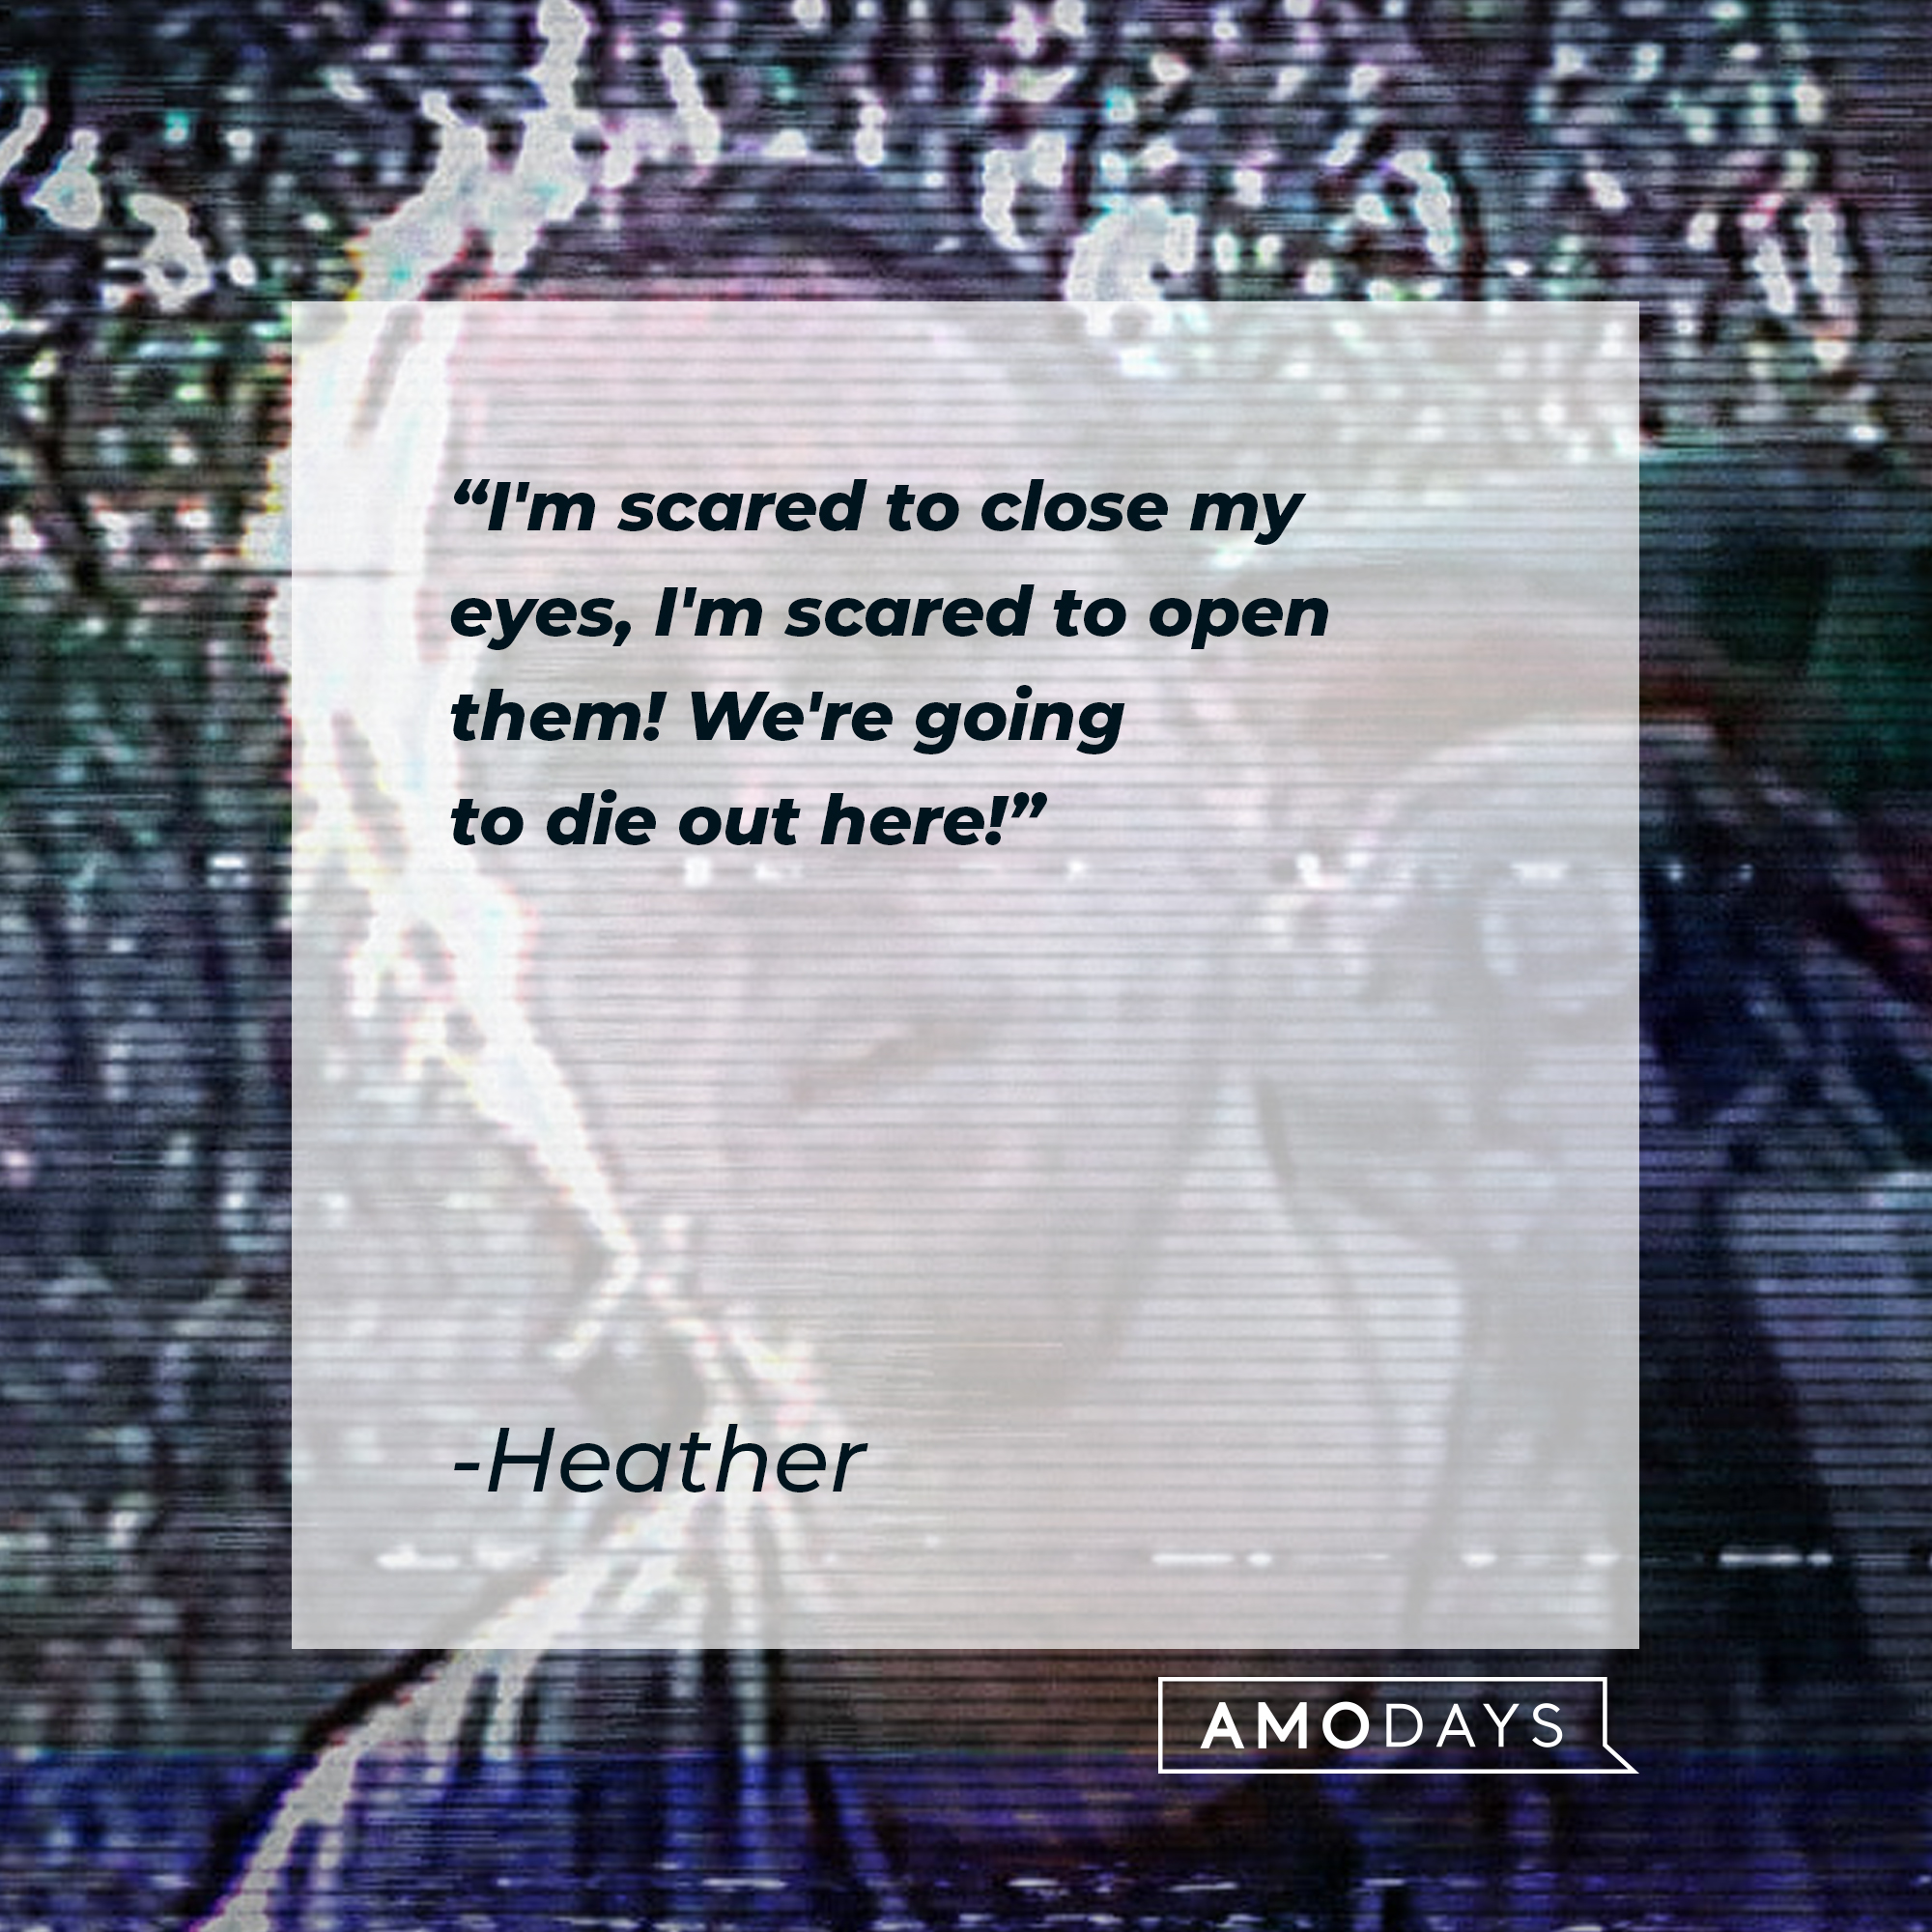 Heather's quote: "I'm scared to close my eyes, I'm scared to open them! We're going to die out here! | Source: facebook.com/blairwitchmovie